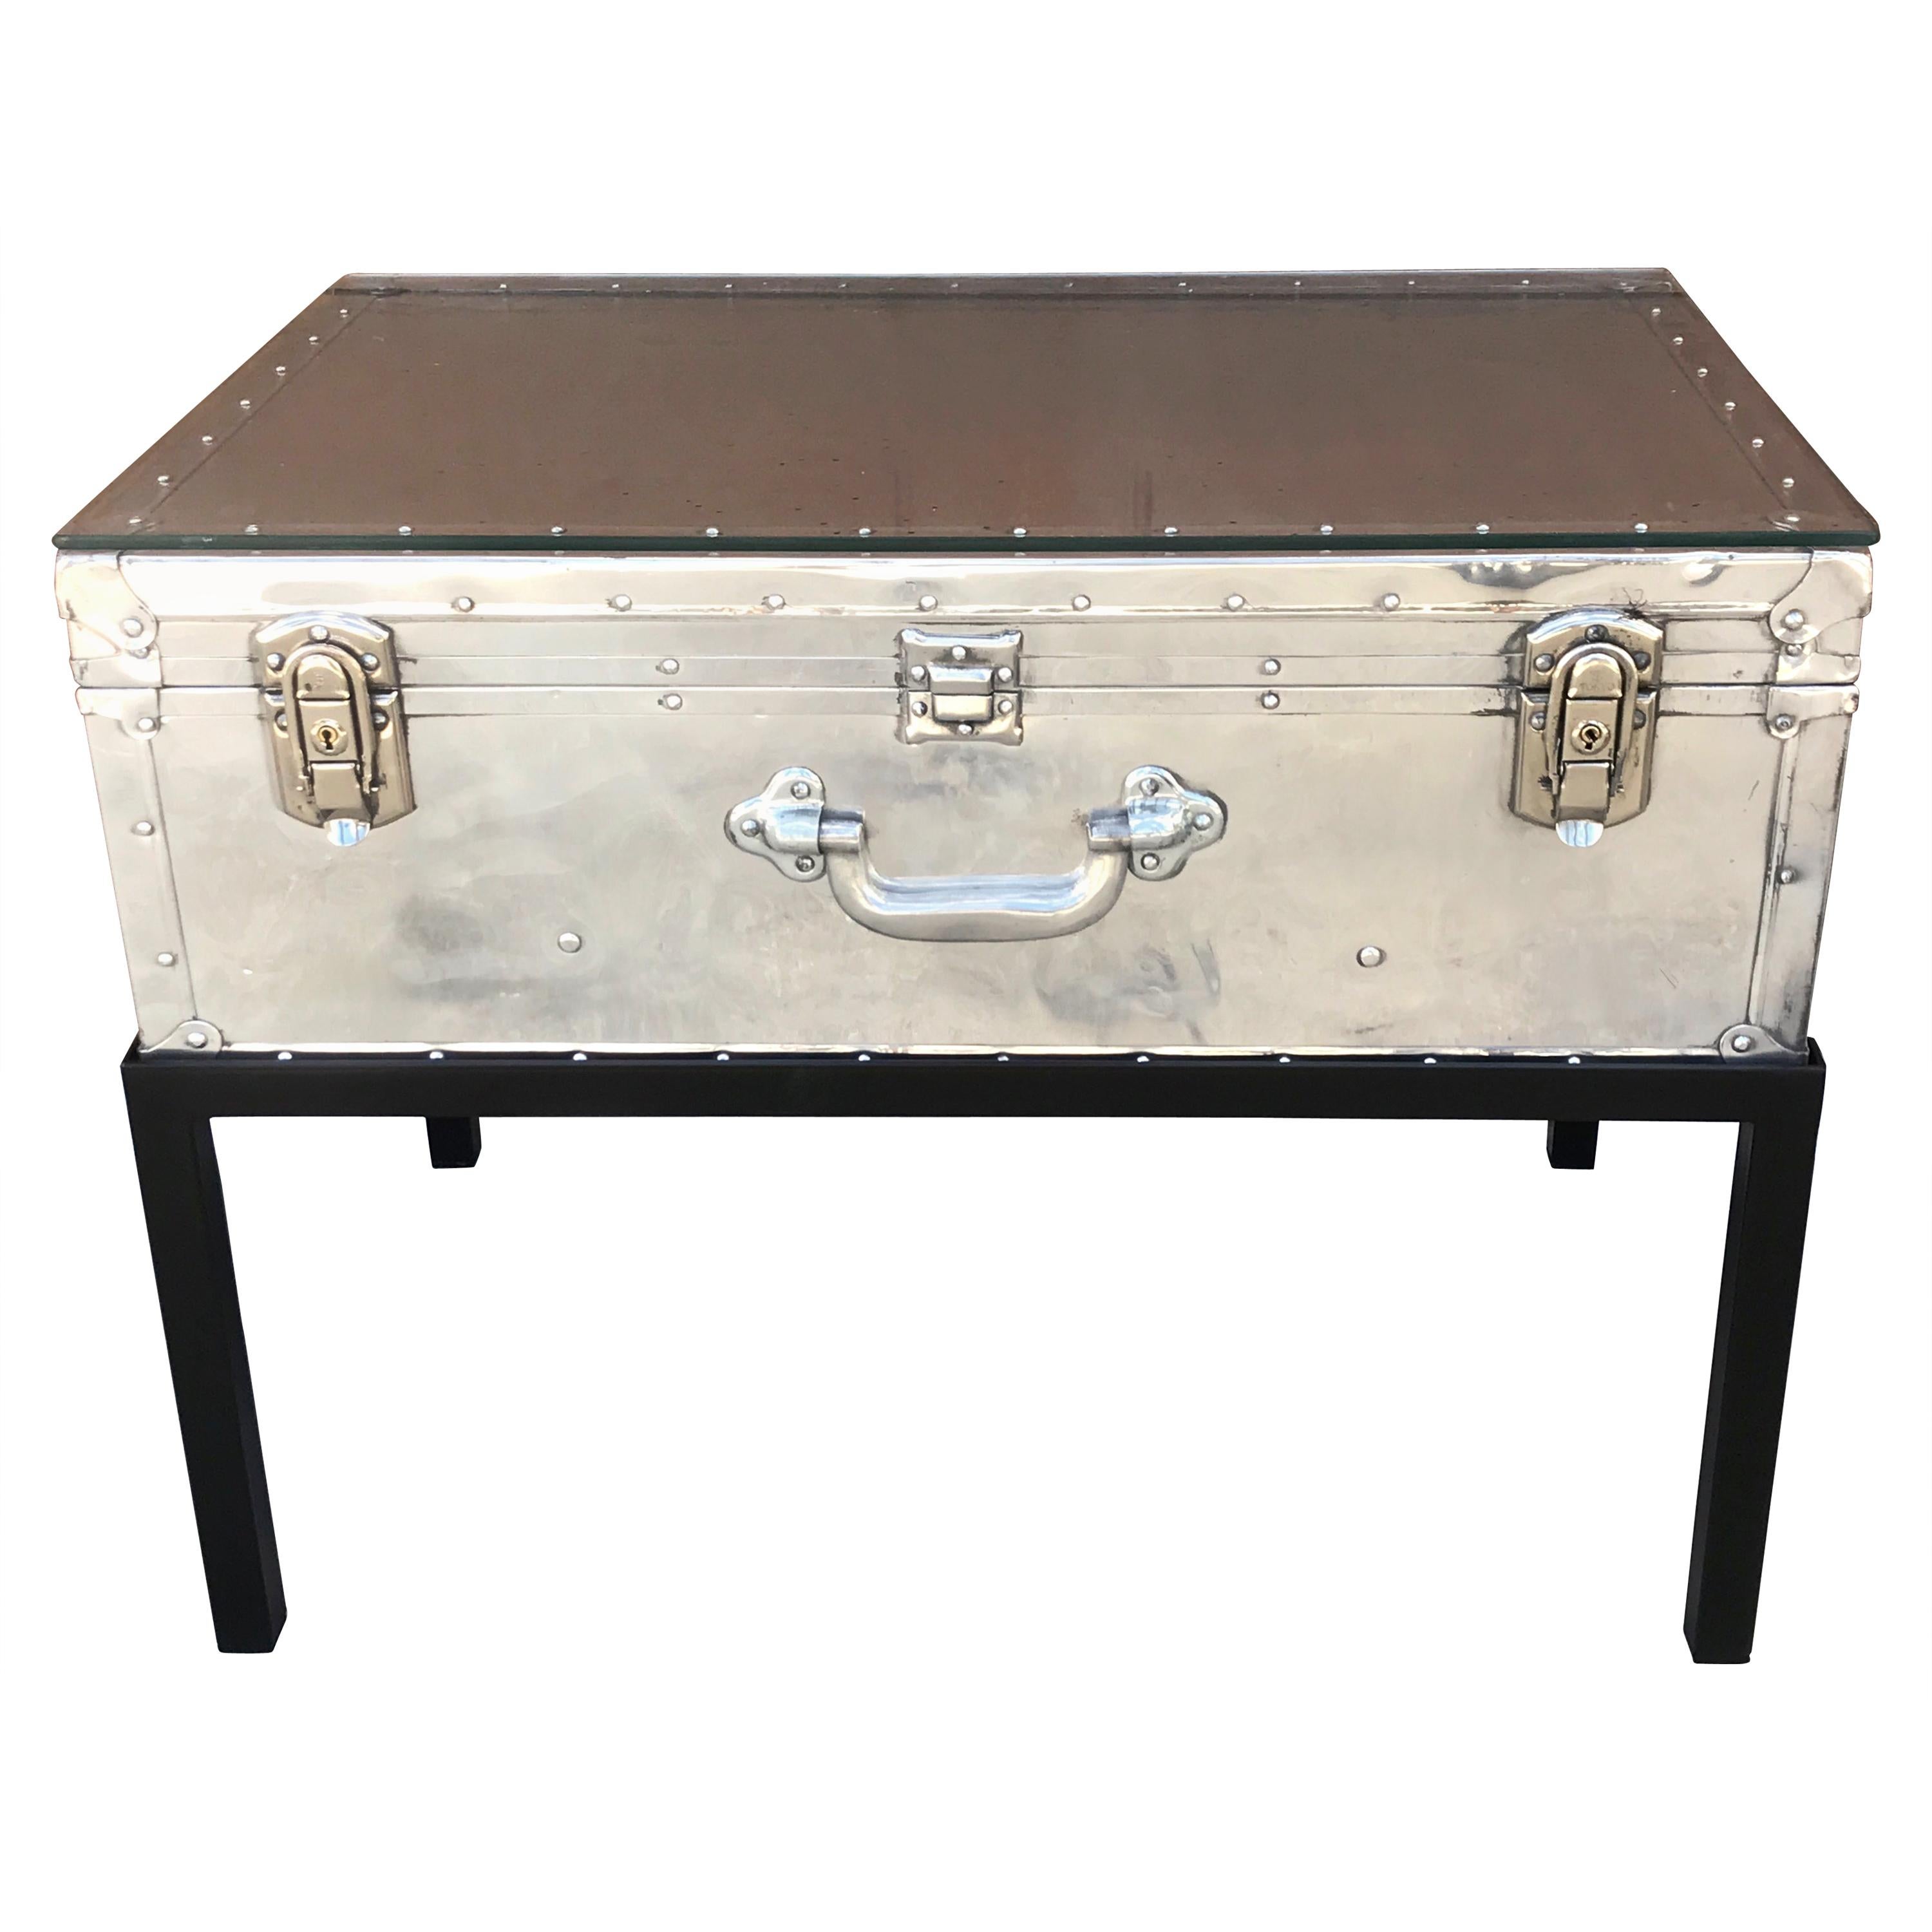 Japanese Post War Aluminum Riveted Trunk on Iron Stand with Glass Top, Restored For Sale